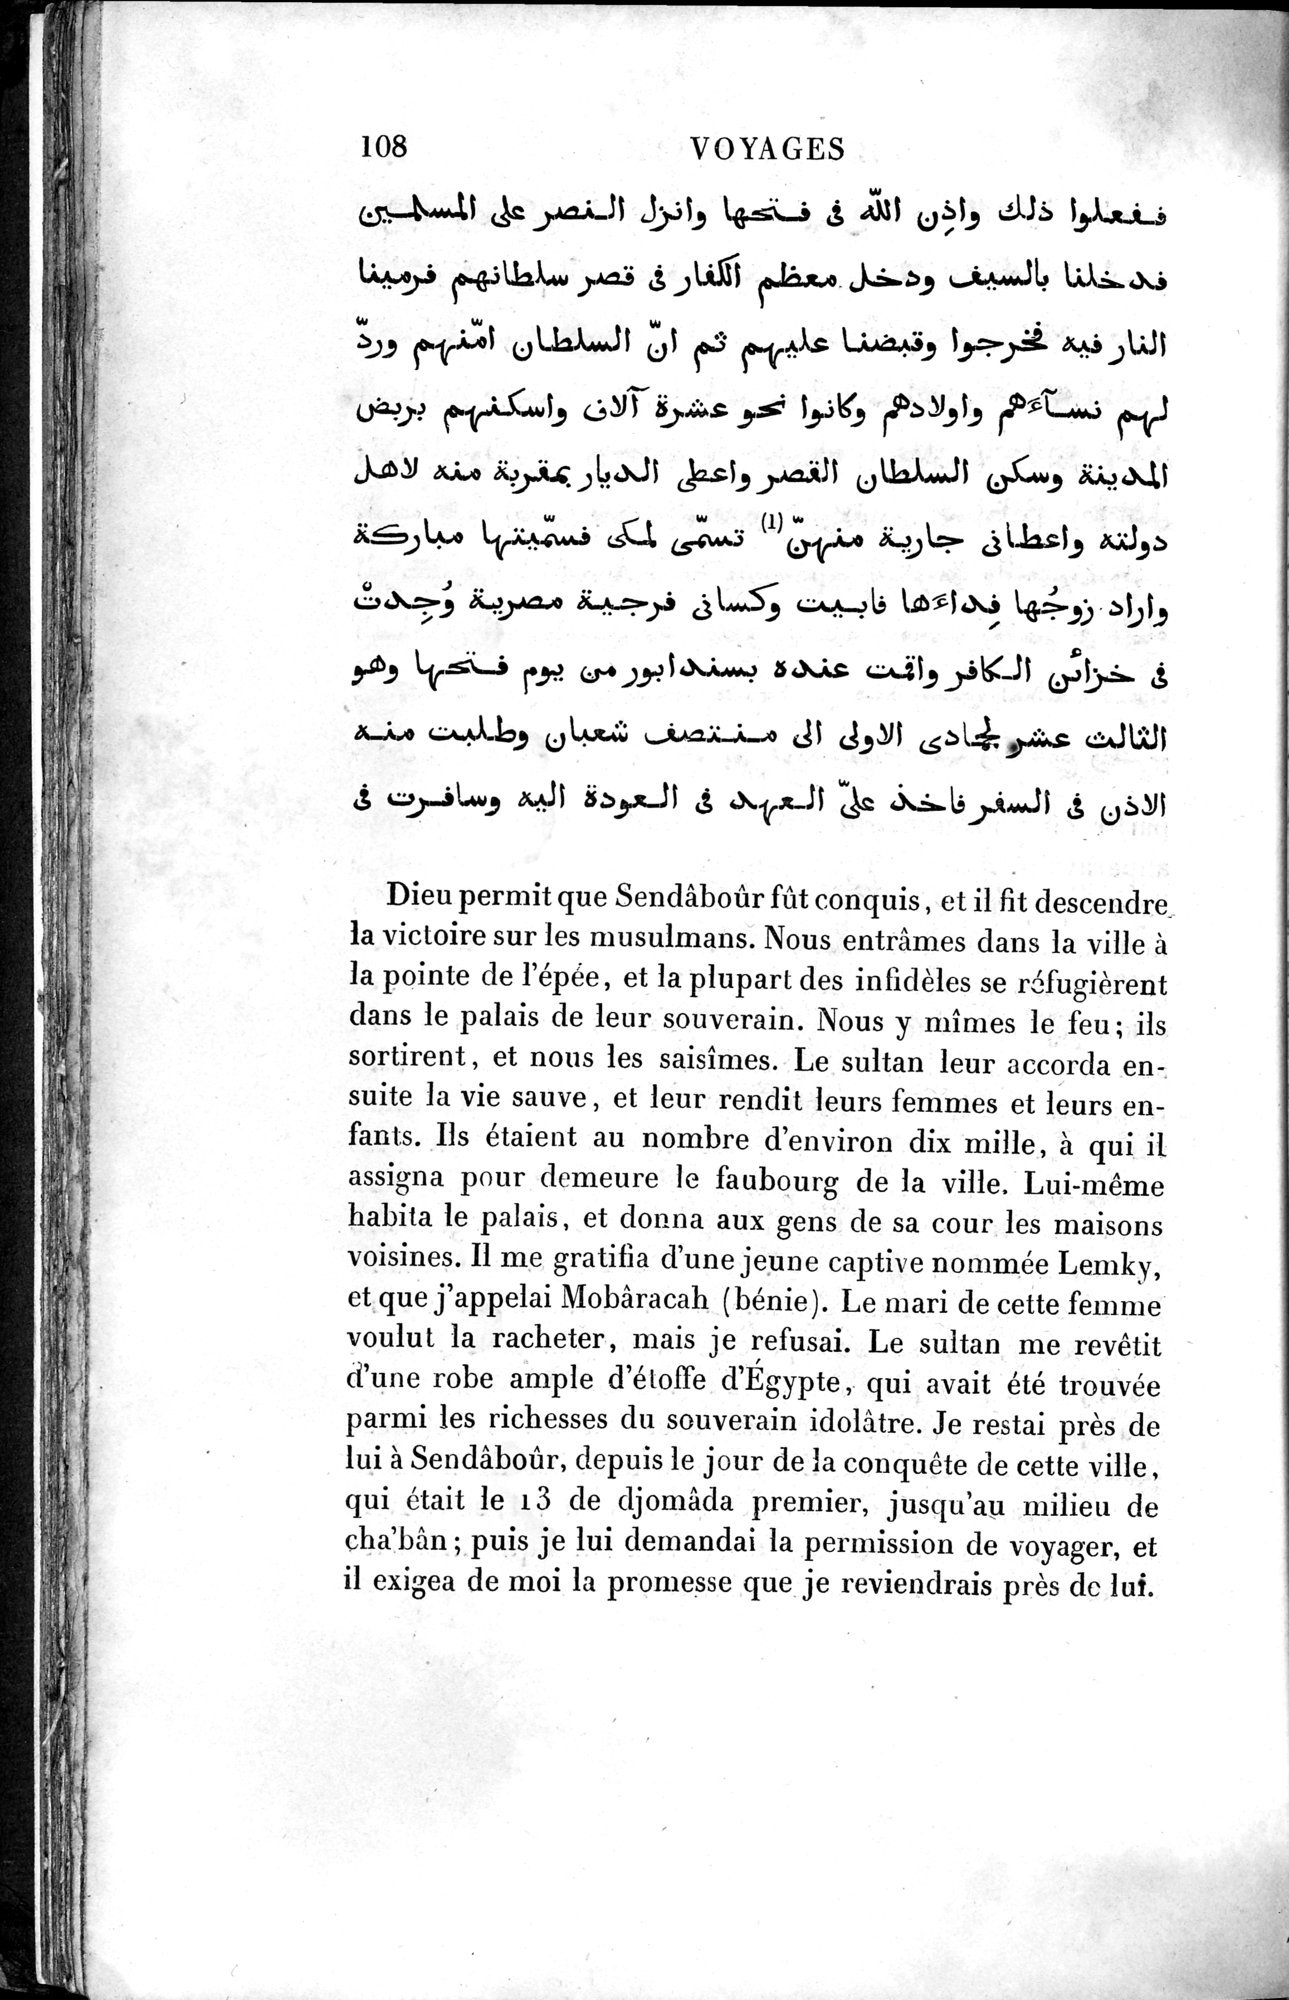 Voyages d'Ibn Batoutah : vol.4 / Page 120 (Grayscale High Resolution Image)